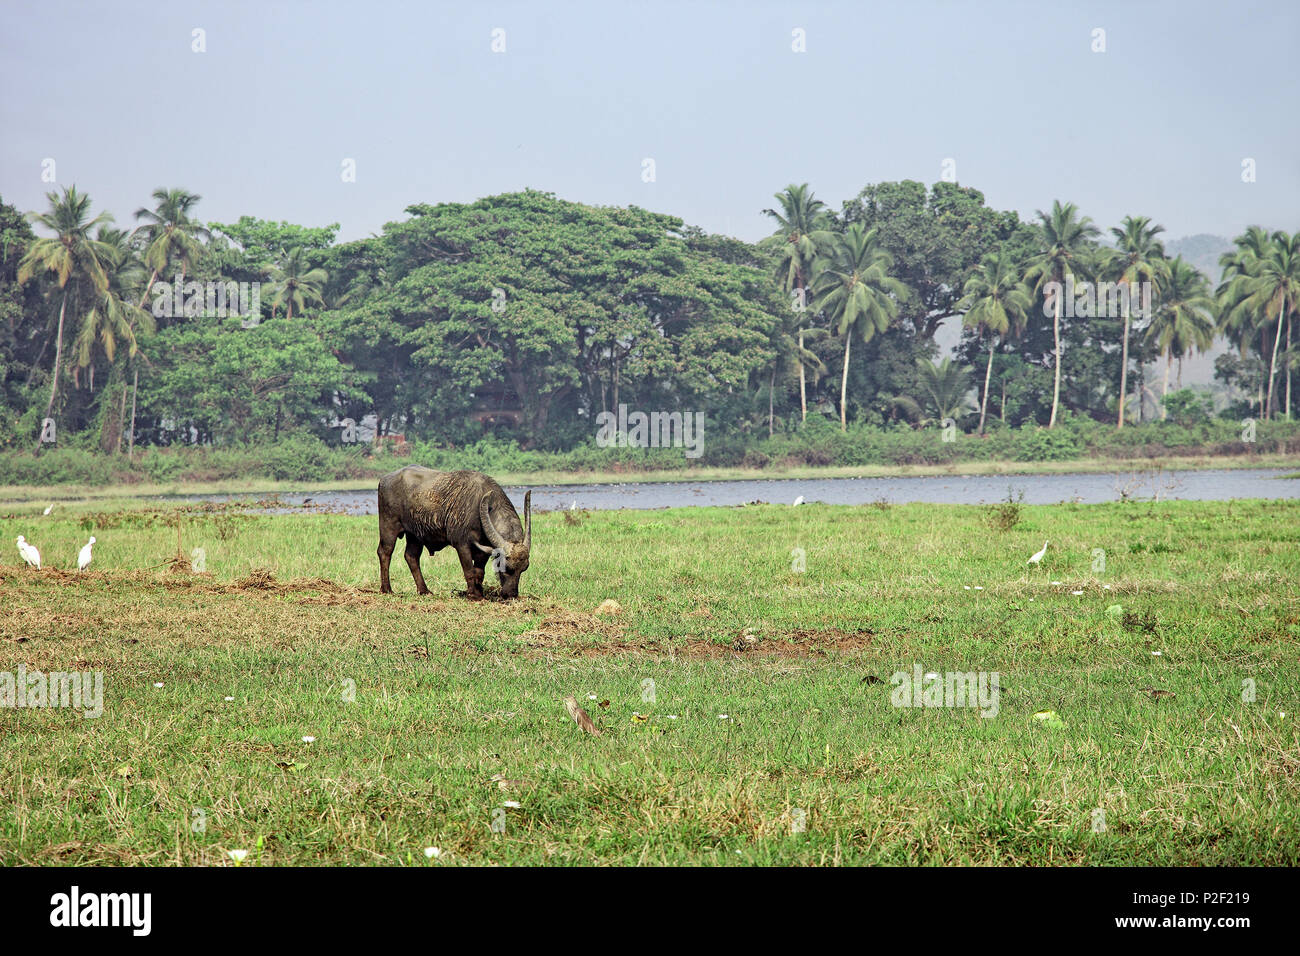 Indian wild bison grazing in grass land on a dry lake bed Stock Photo